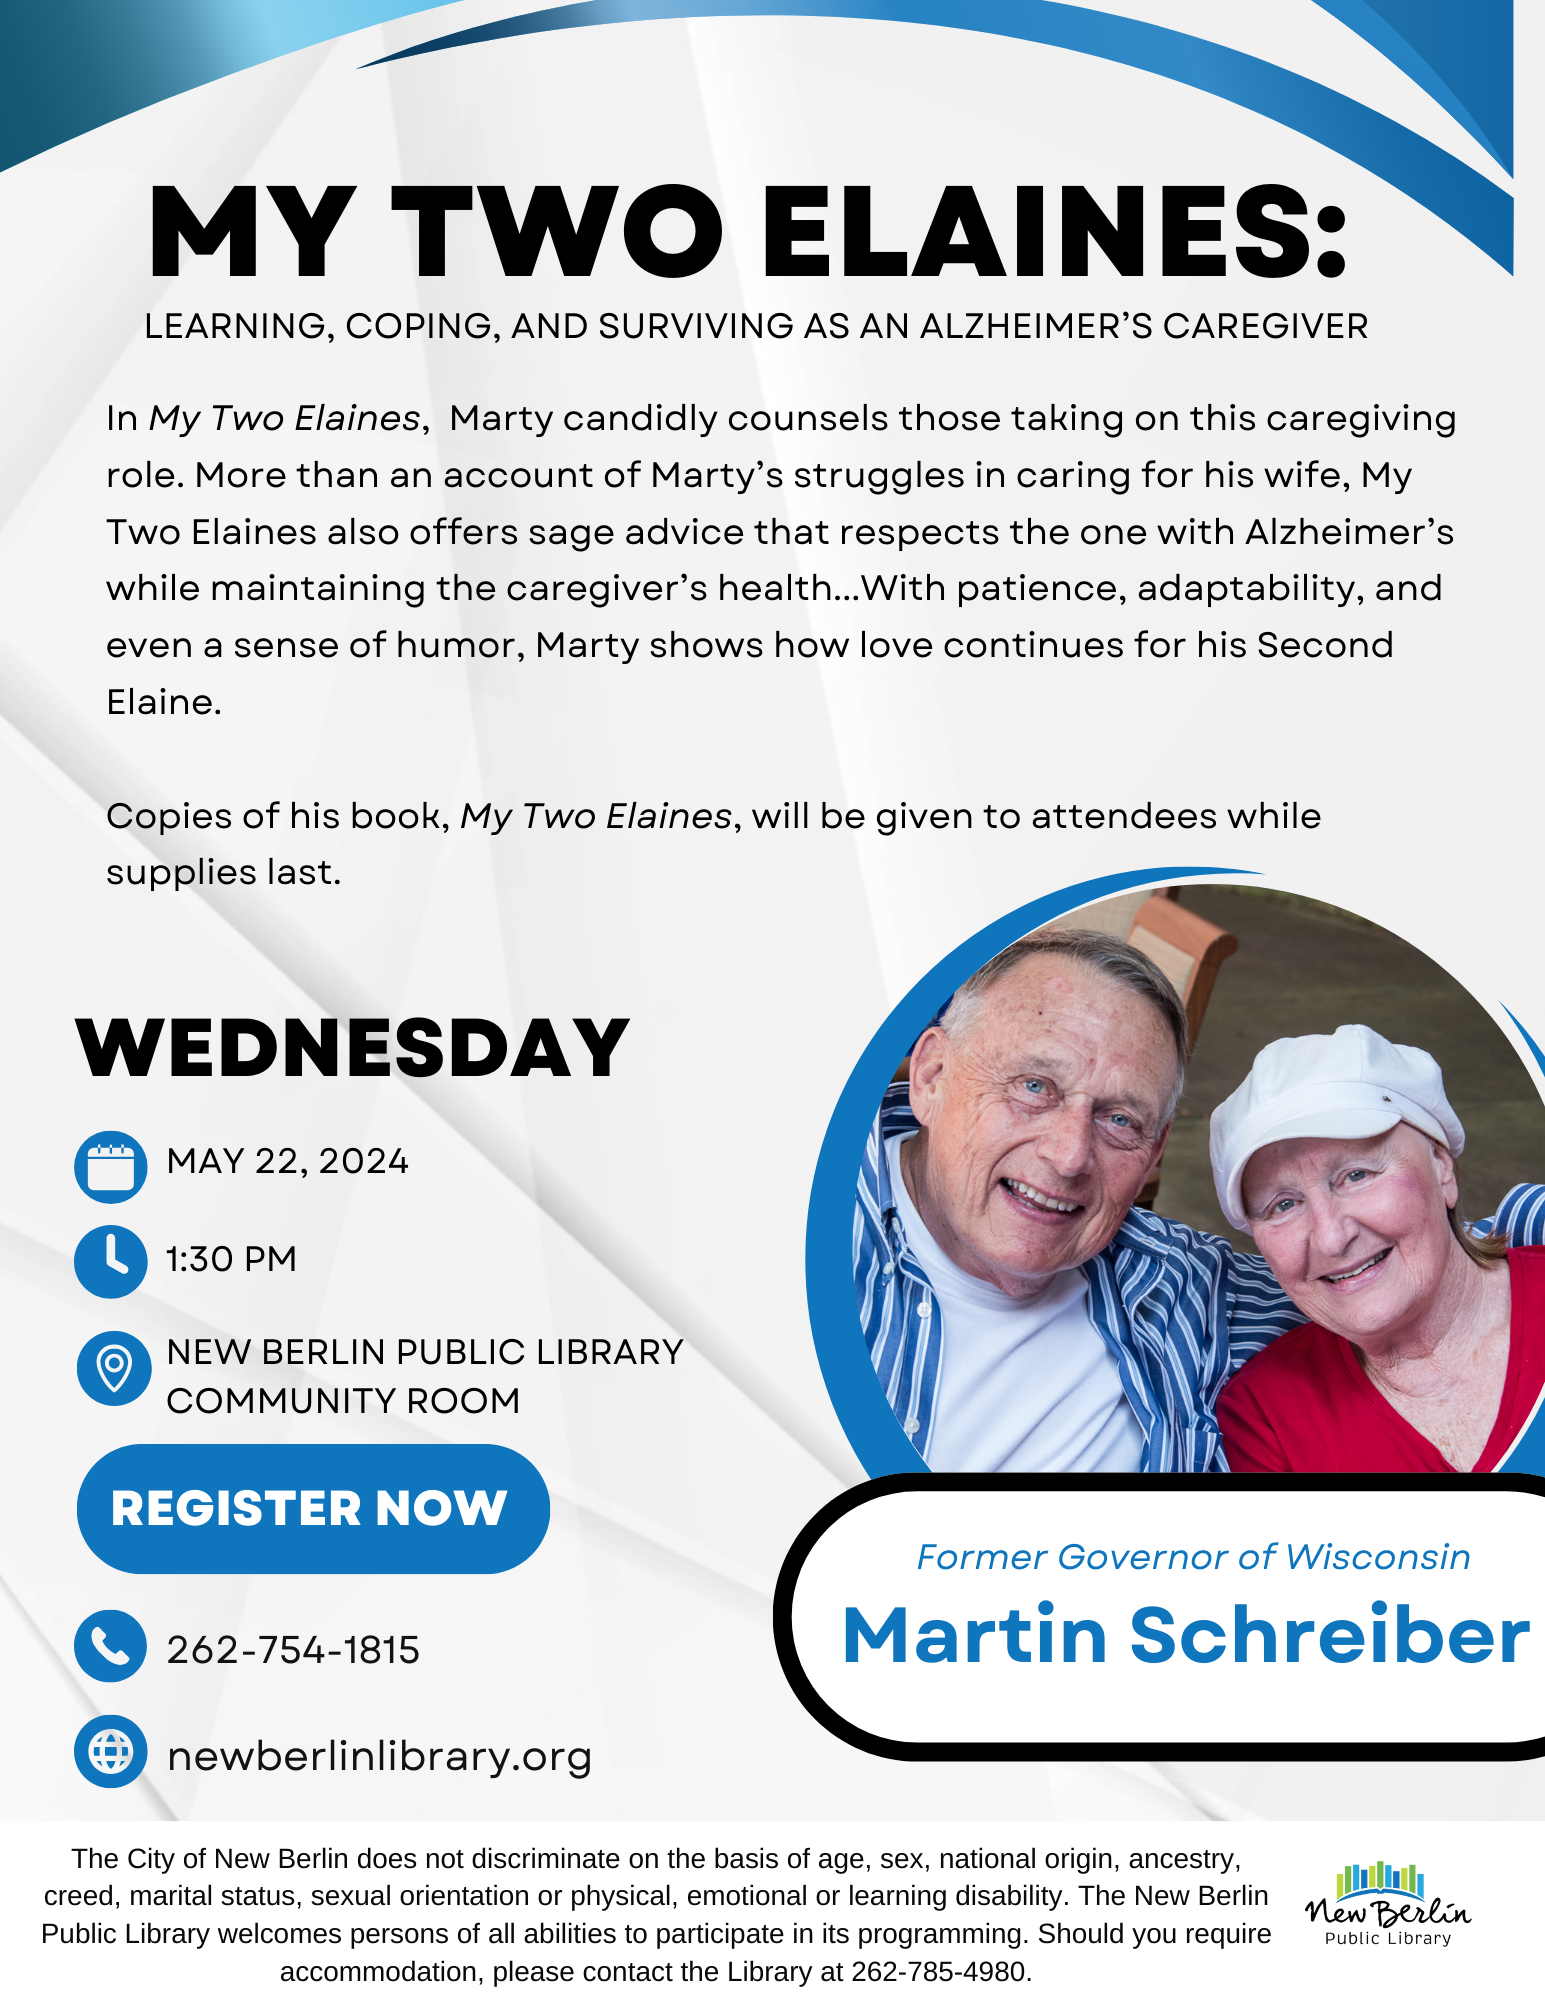 Flyer depicts Martin and his wife, elaine. Flyer also contains information about the event that is listed on this event, such as program description, registration, and time information. 